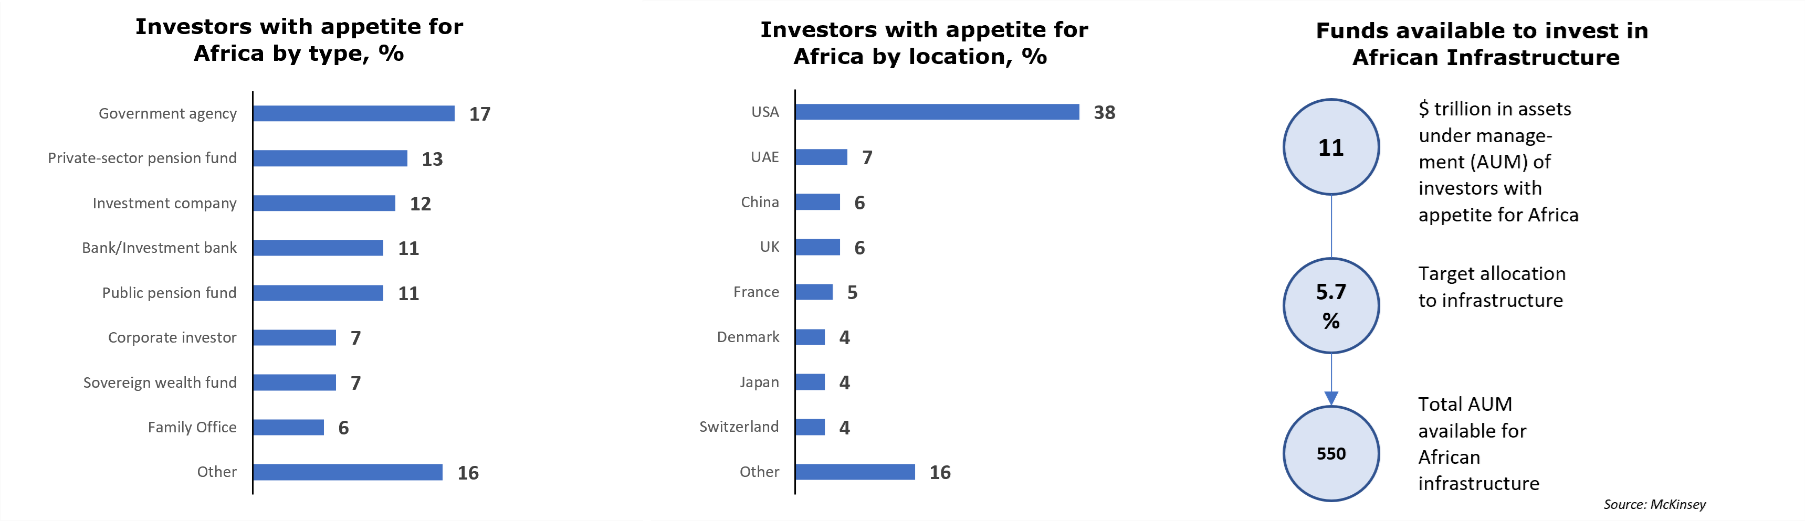 Figure of investor appetite for Africa by type, region and size